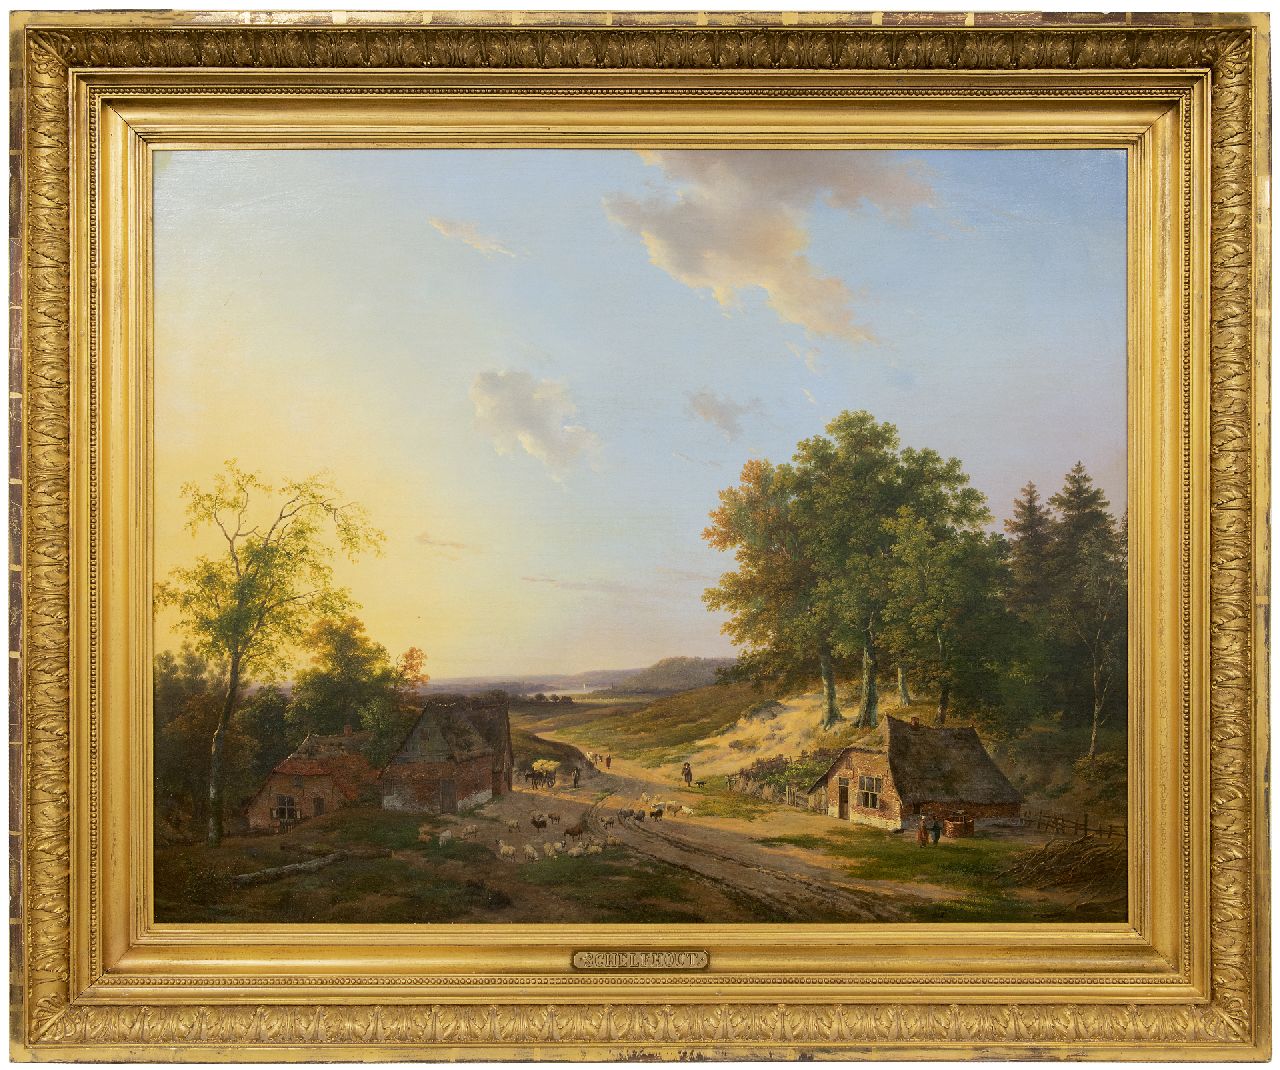 Schelfhout A.  | Andreas Schelfhout, Extensive river landscape with a shepherd and land folk, oil on canvas 75.0 x 94.5 cm, signed l.l.